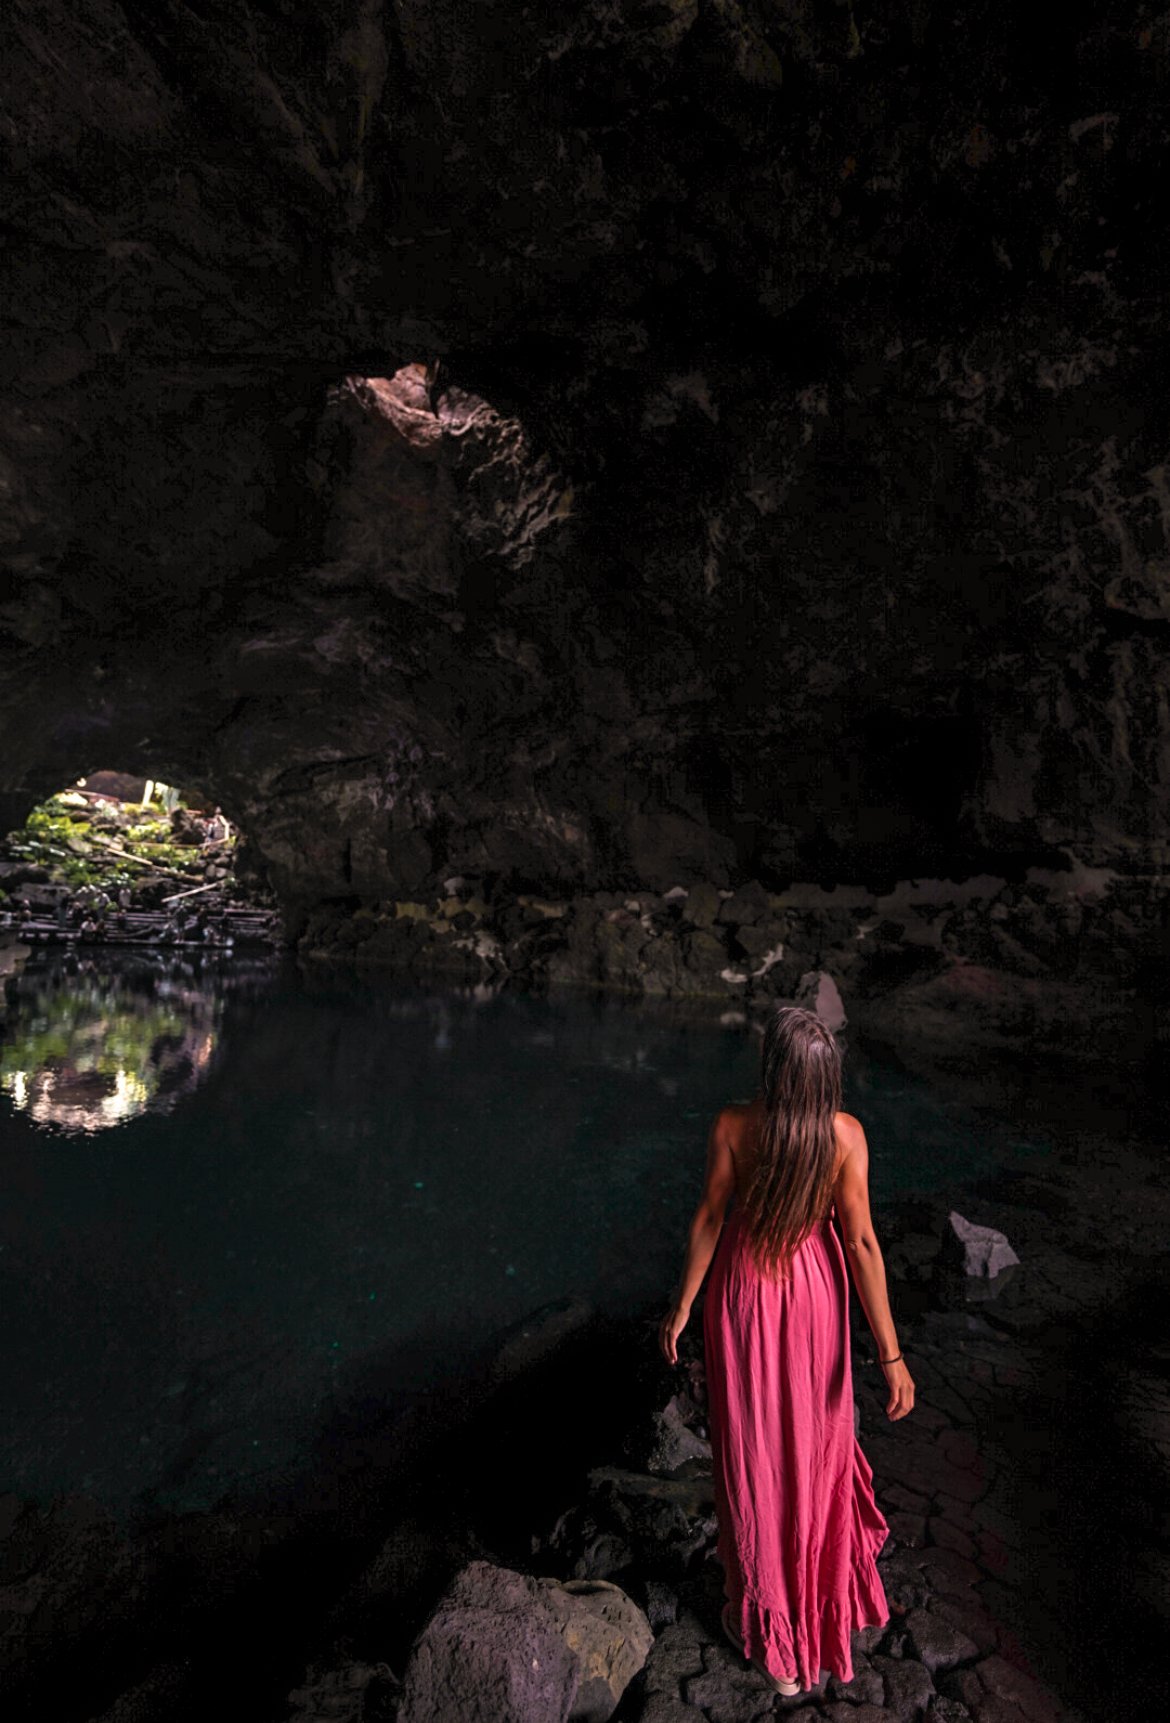 Jameos del Agua, things to see in Lanzarote